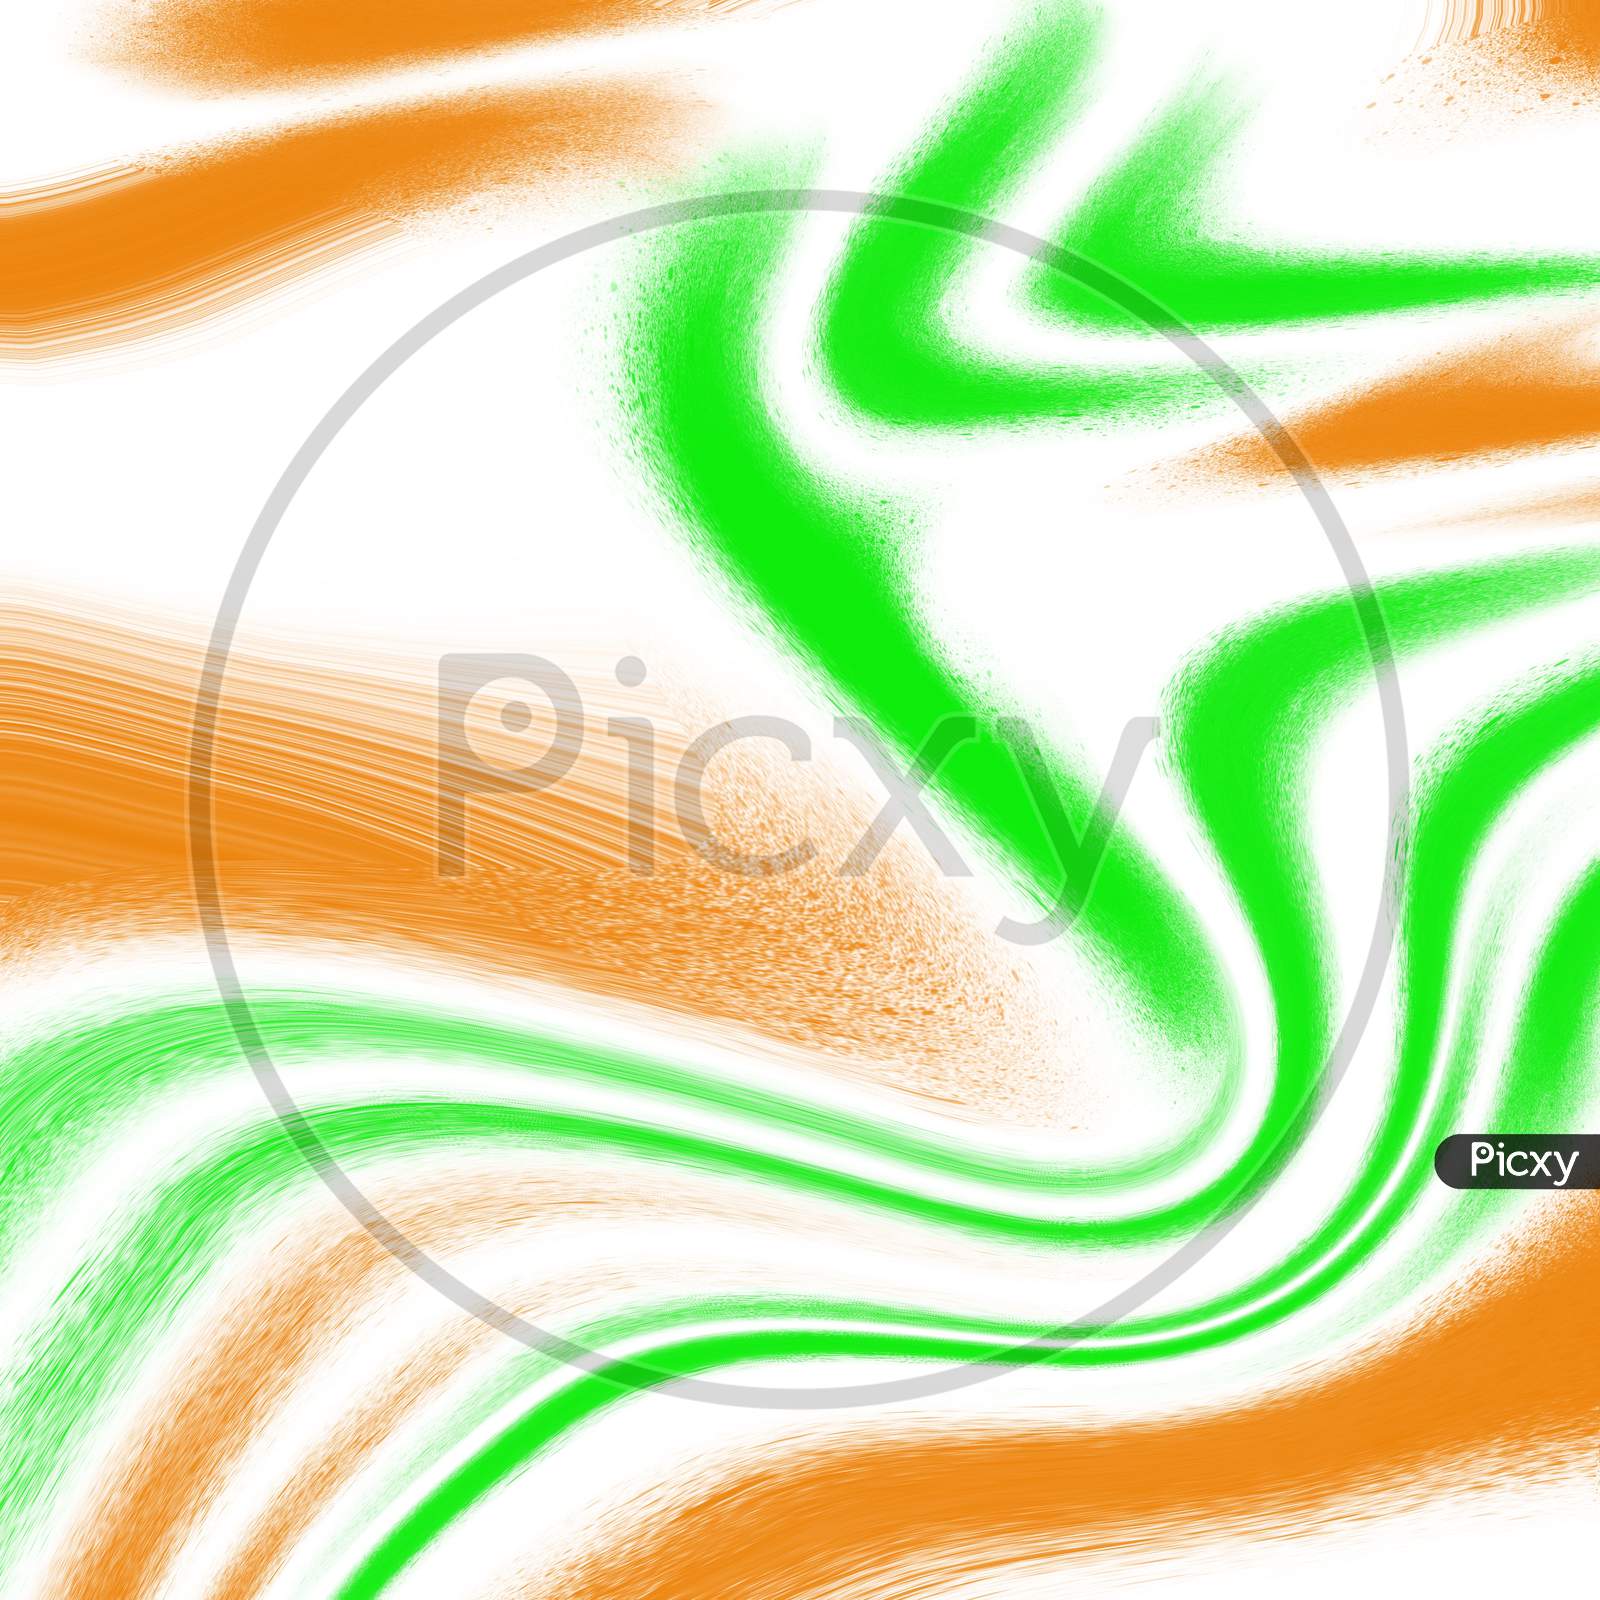 Illustration of Indian Flag abstract background for Indian Independence Day banners, poster, wallpapers &graphic uses